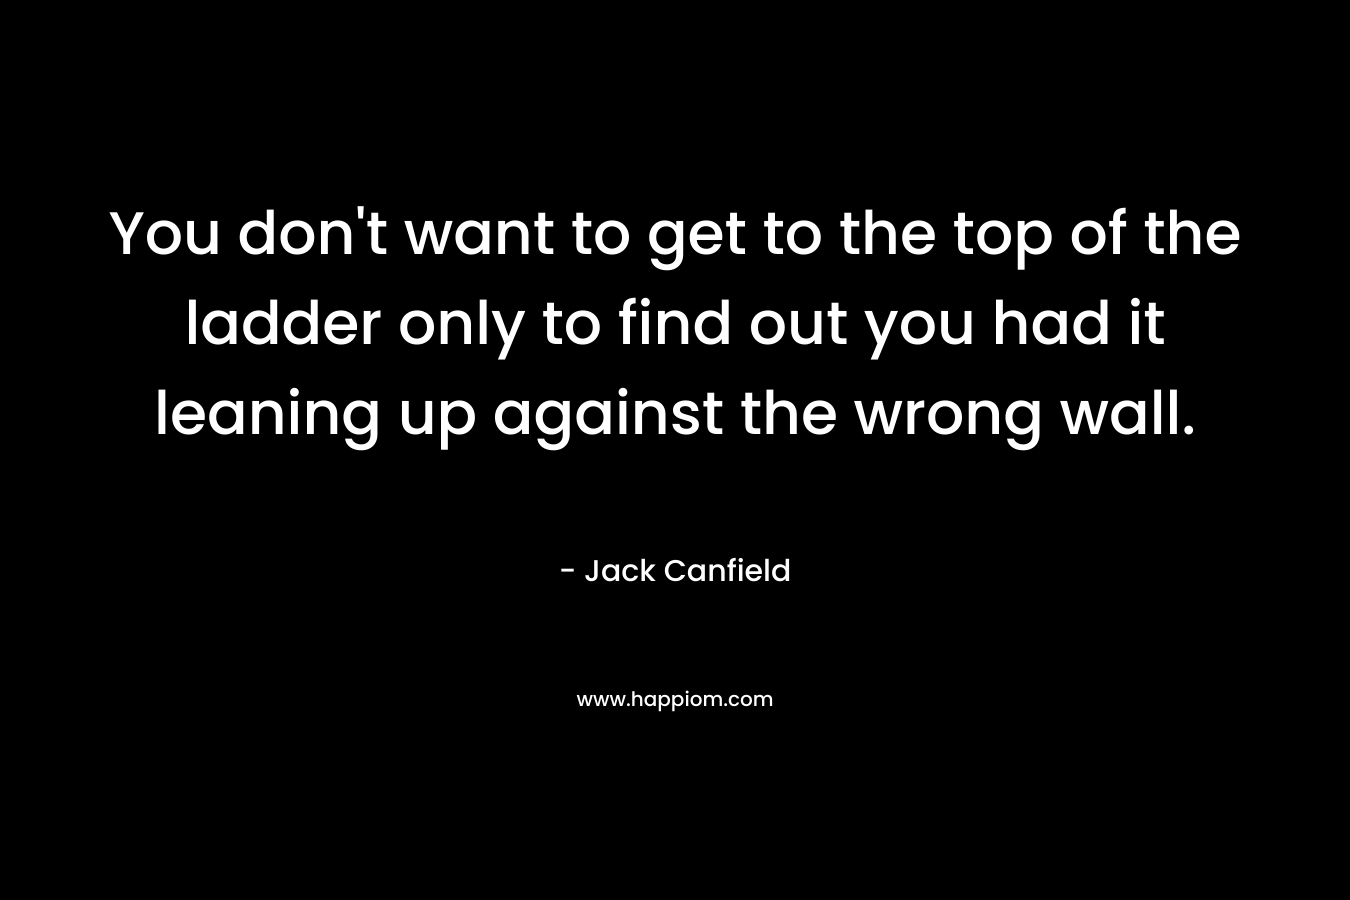 You don’t want to get to the top of the ladder only to find out you had it leaning up against the wrong wall. – Jack Canfield